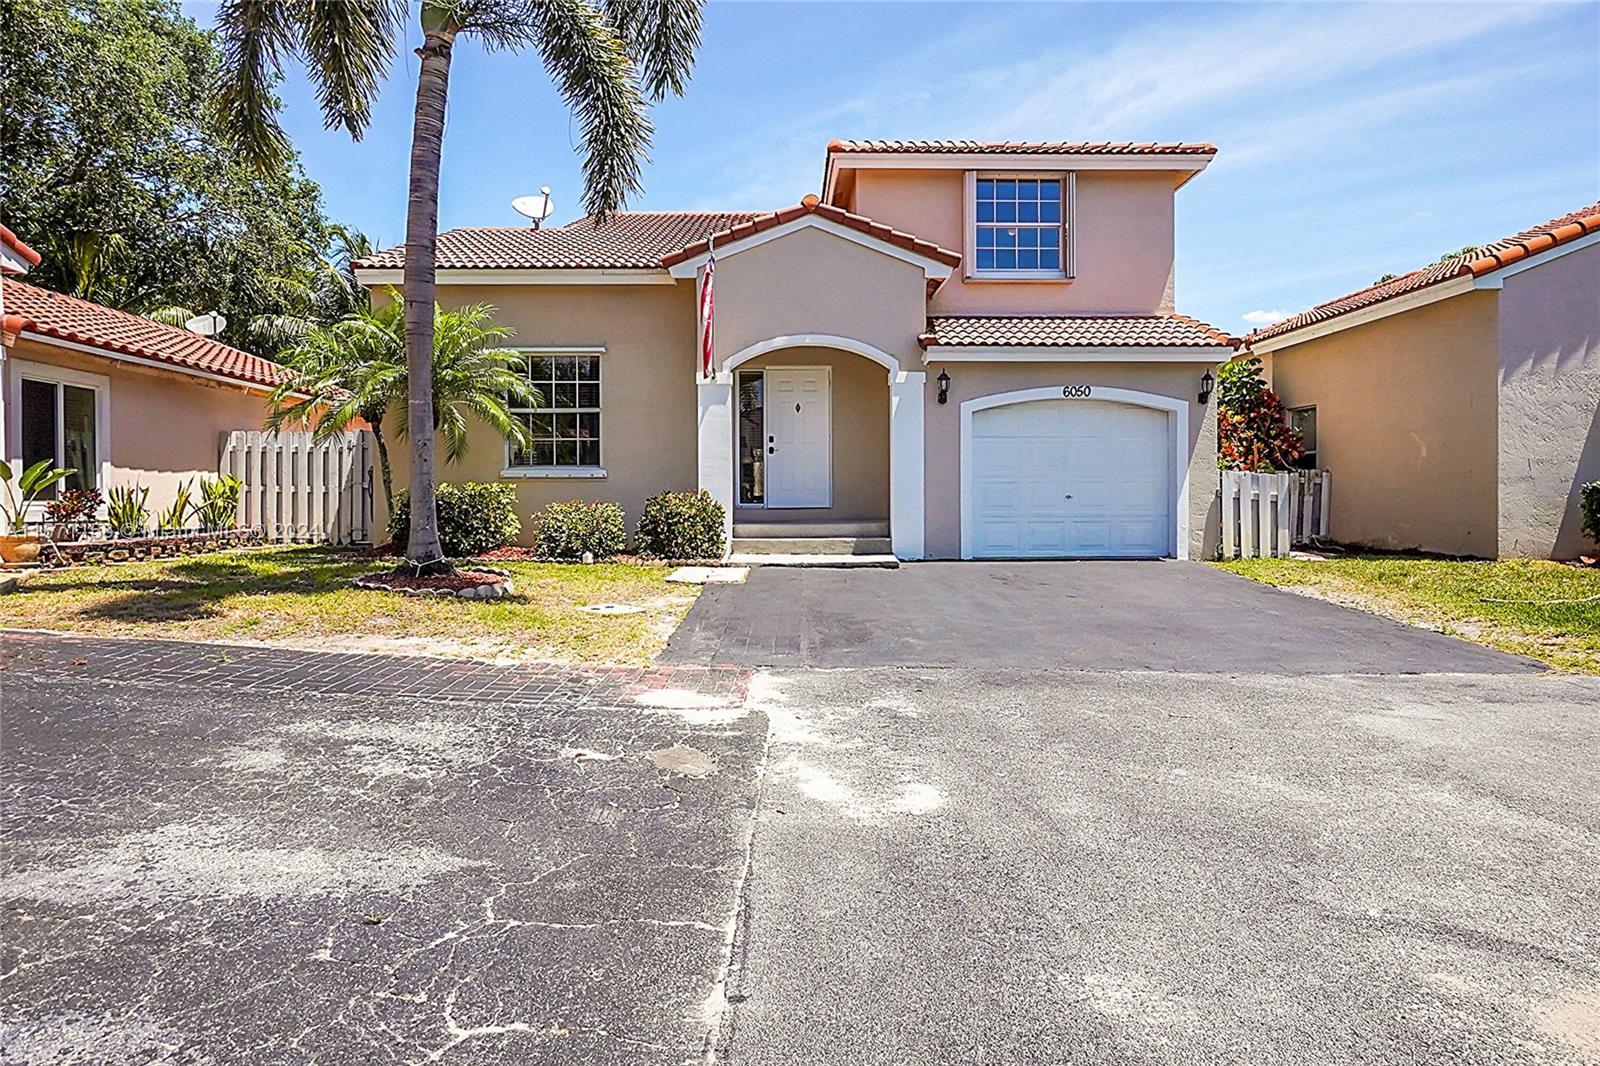 Photo of 6050 NW 44th Wy in Coconut Creek, FL